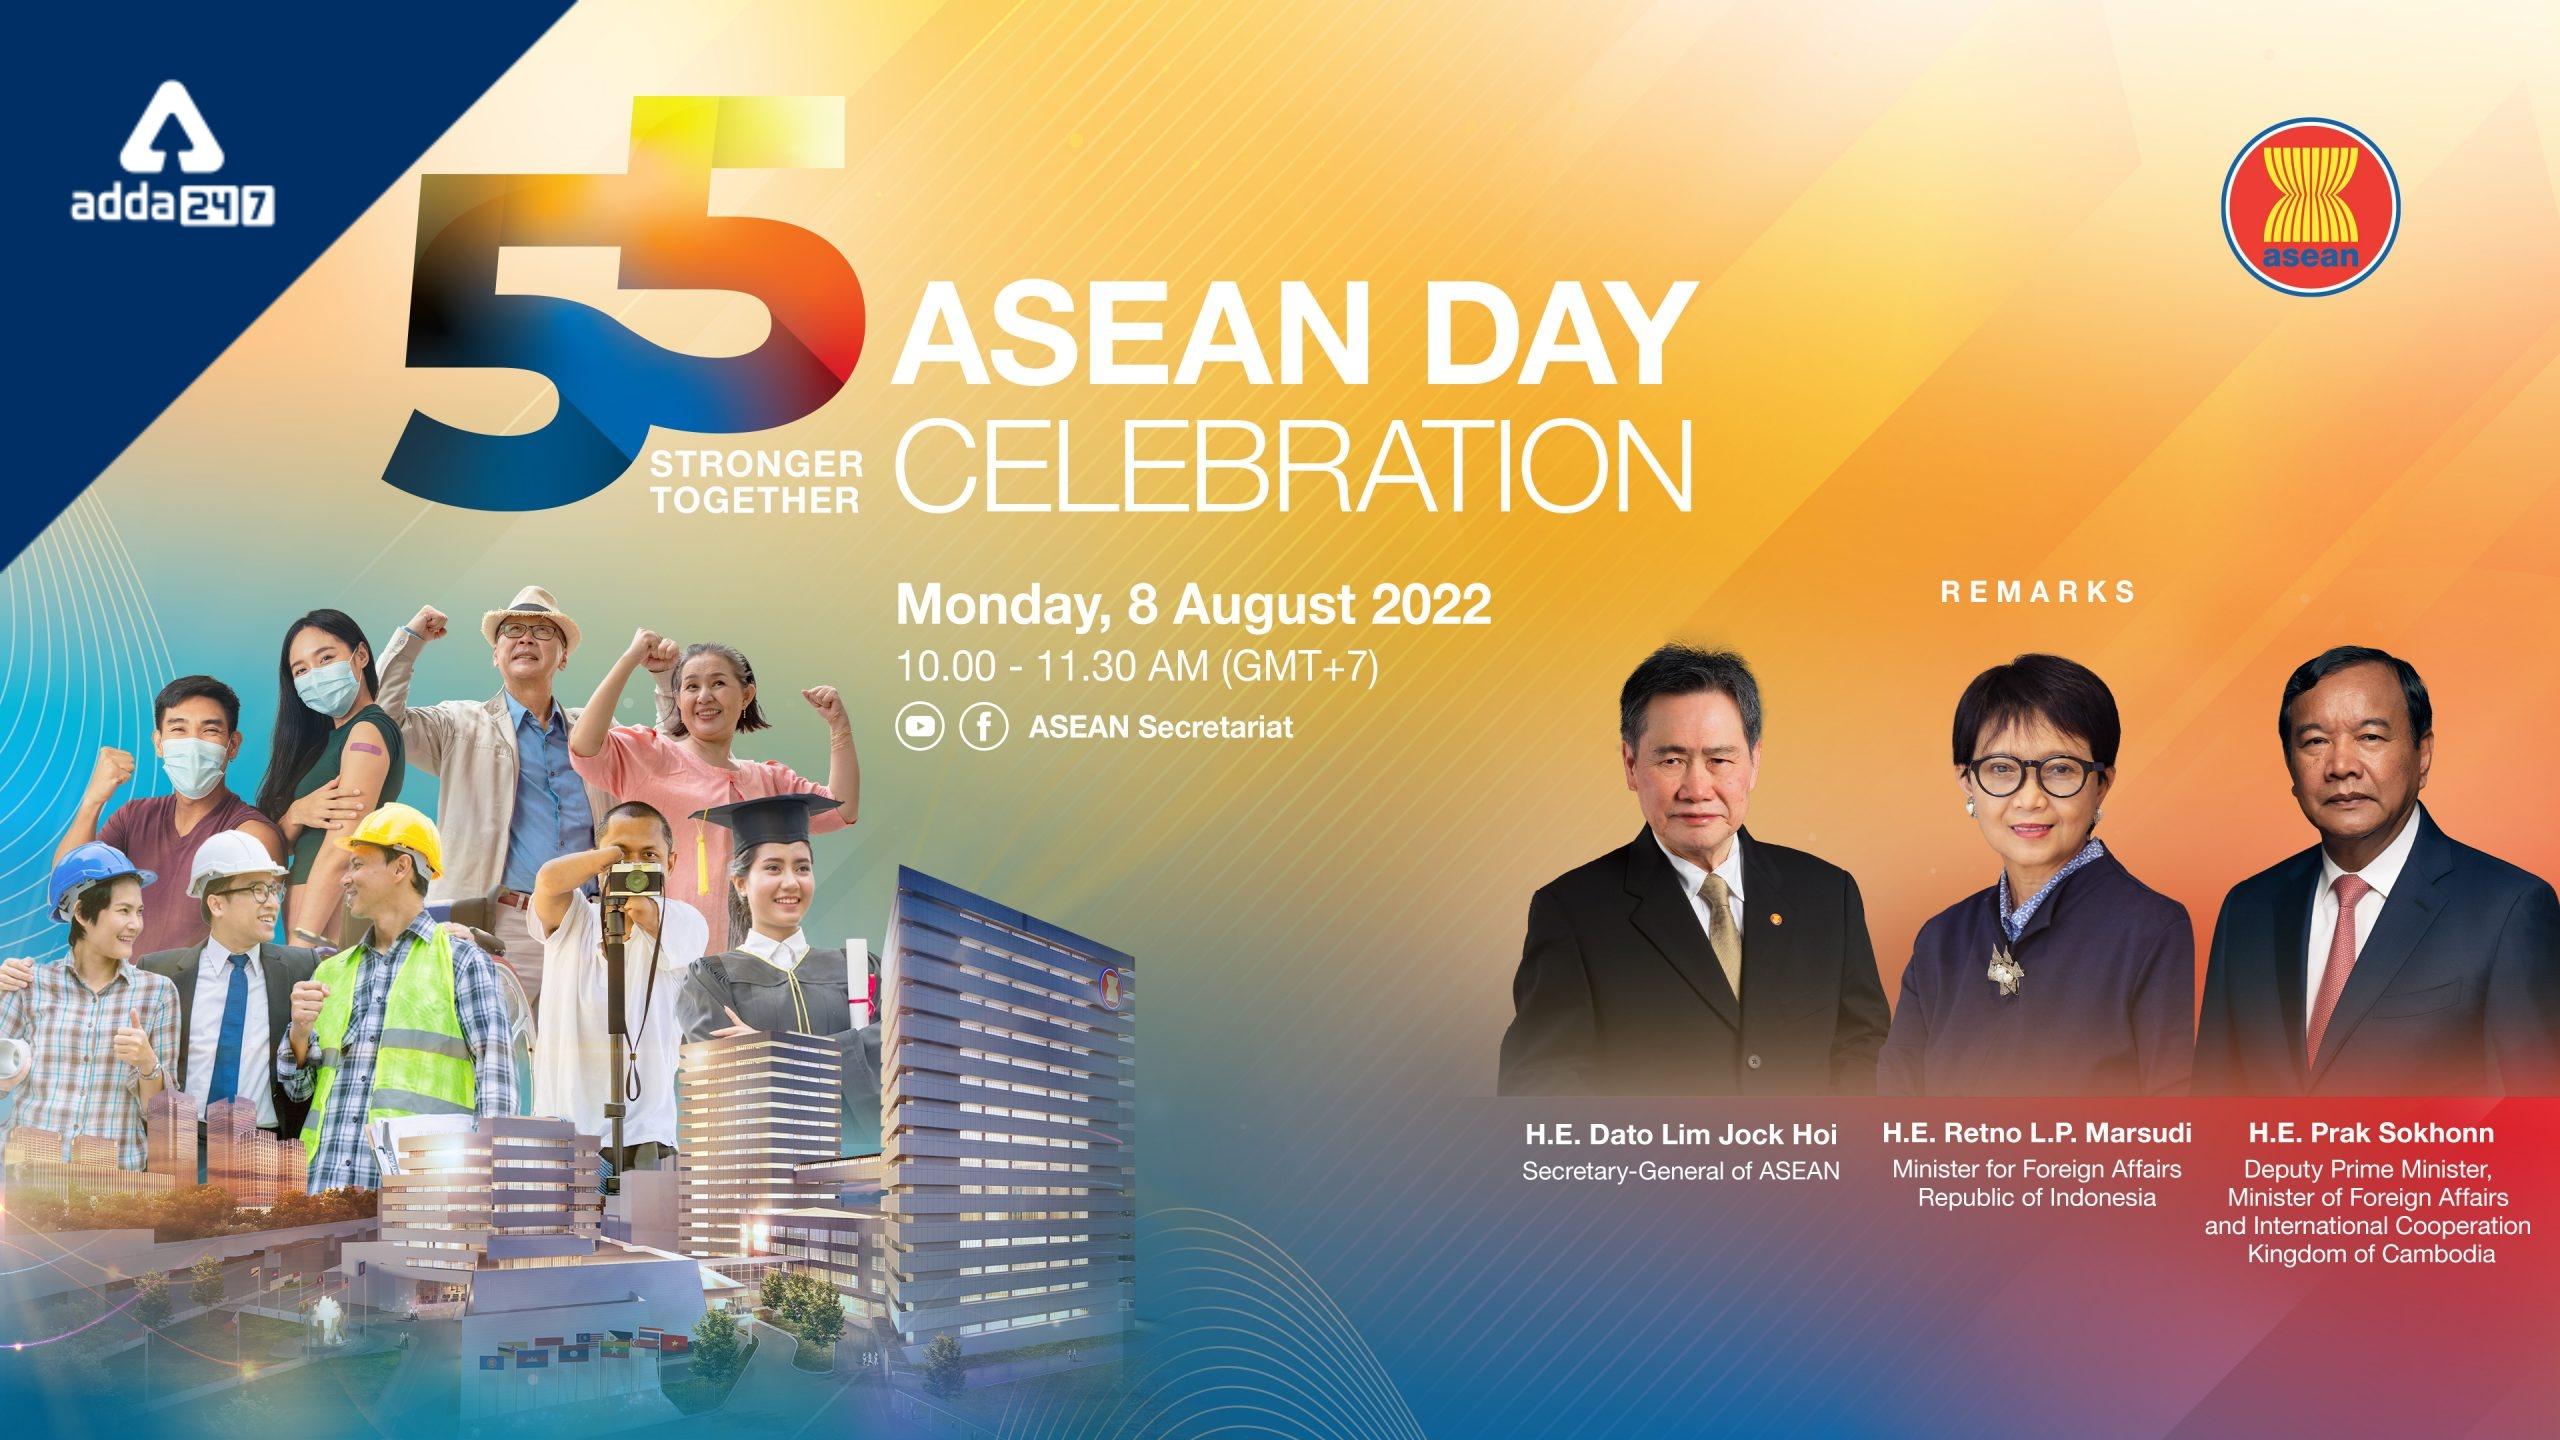 ASEAN Has Celebrated Its 55th Anniversary In 2022._40.1